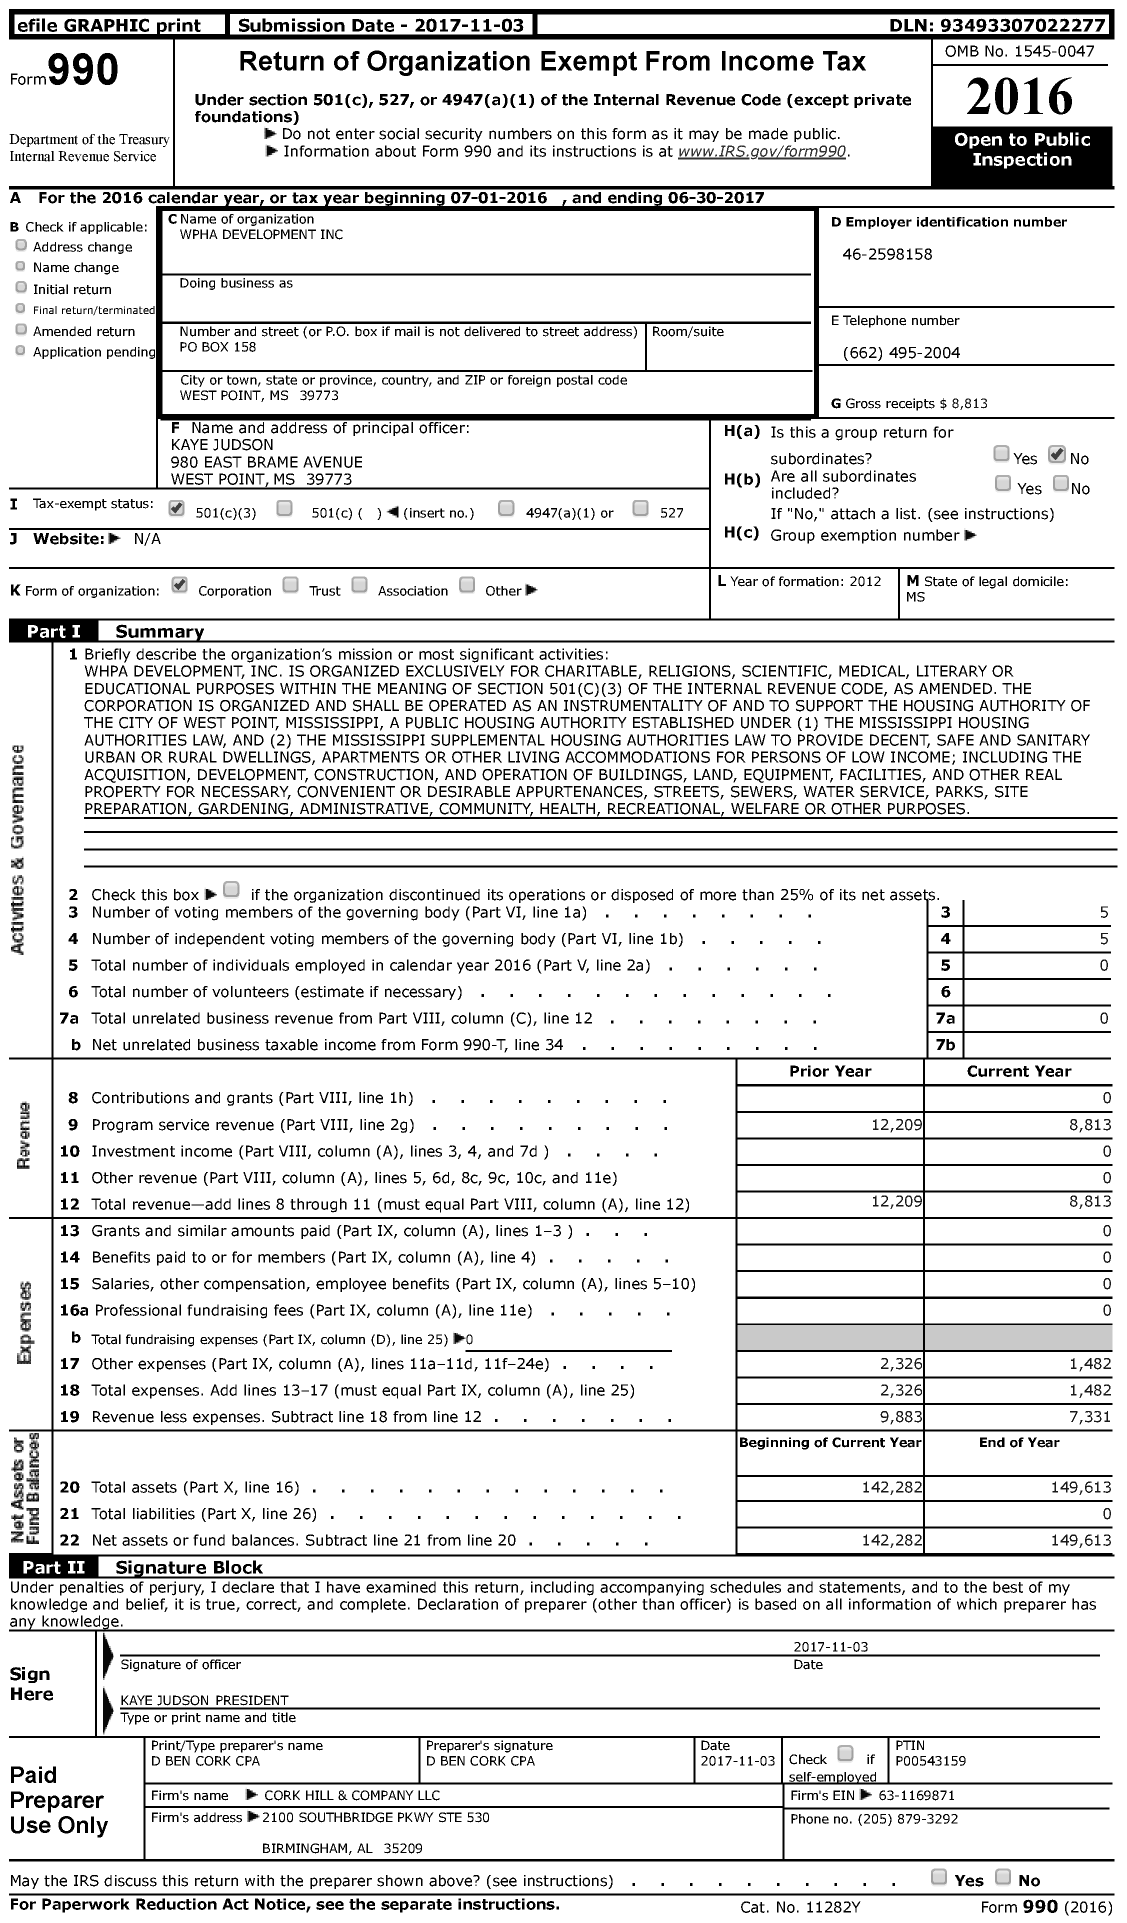 Image of first page of 2016 Form 990 for Wpha Development